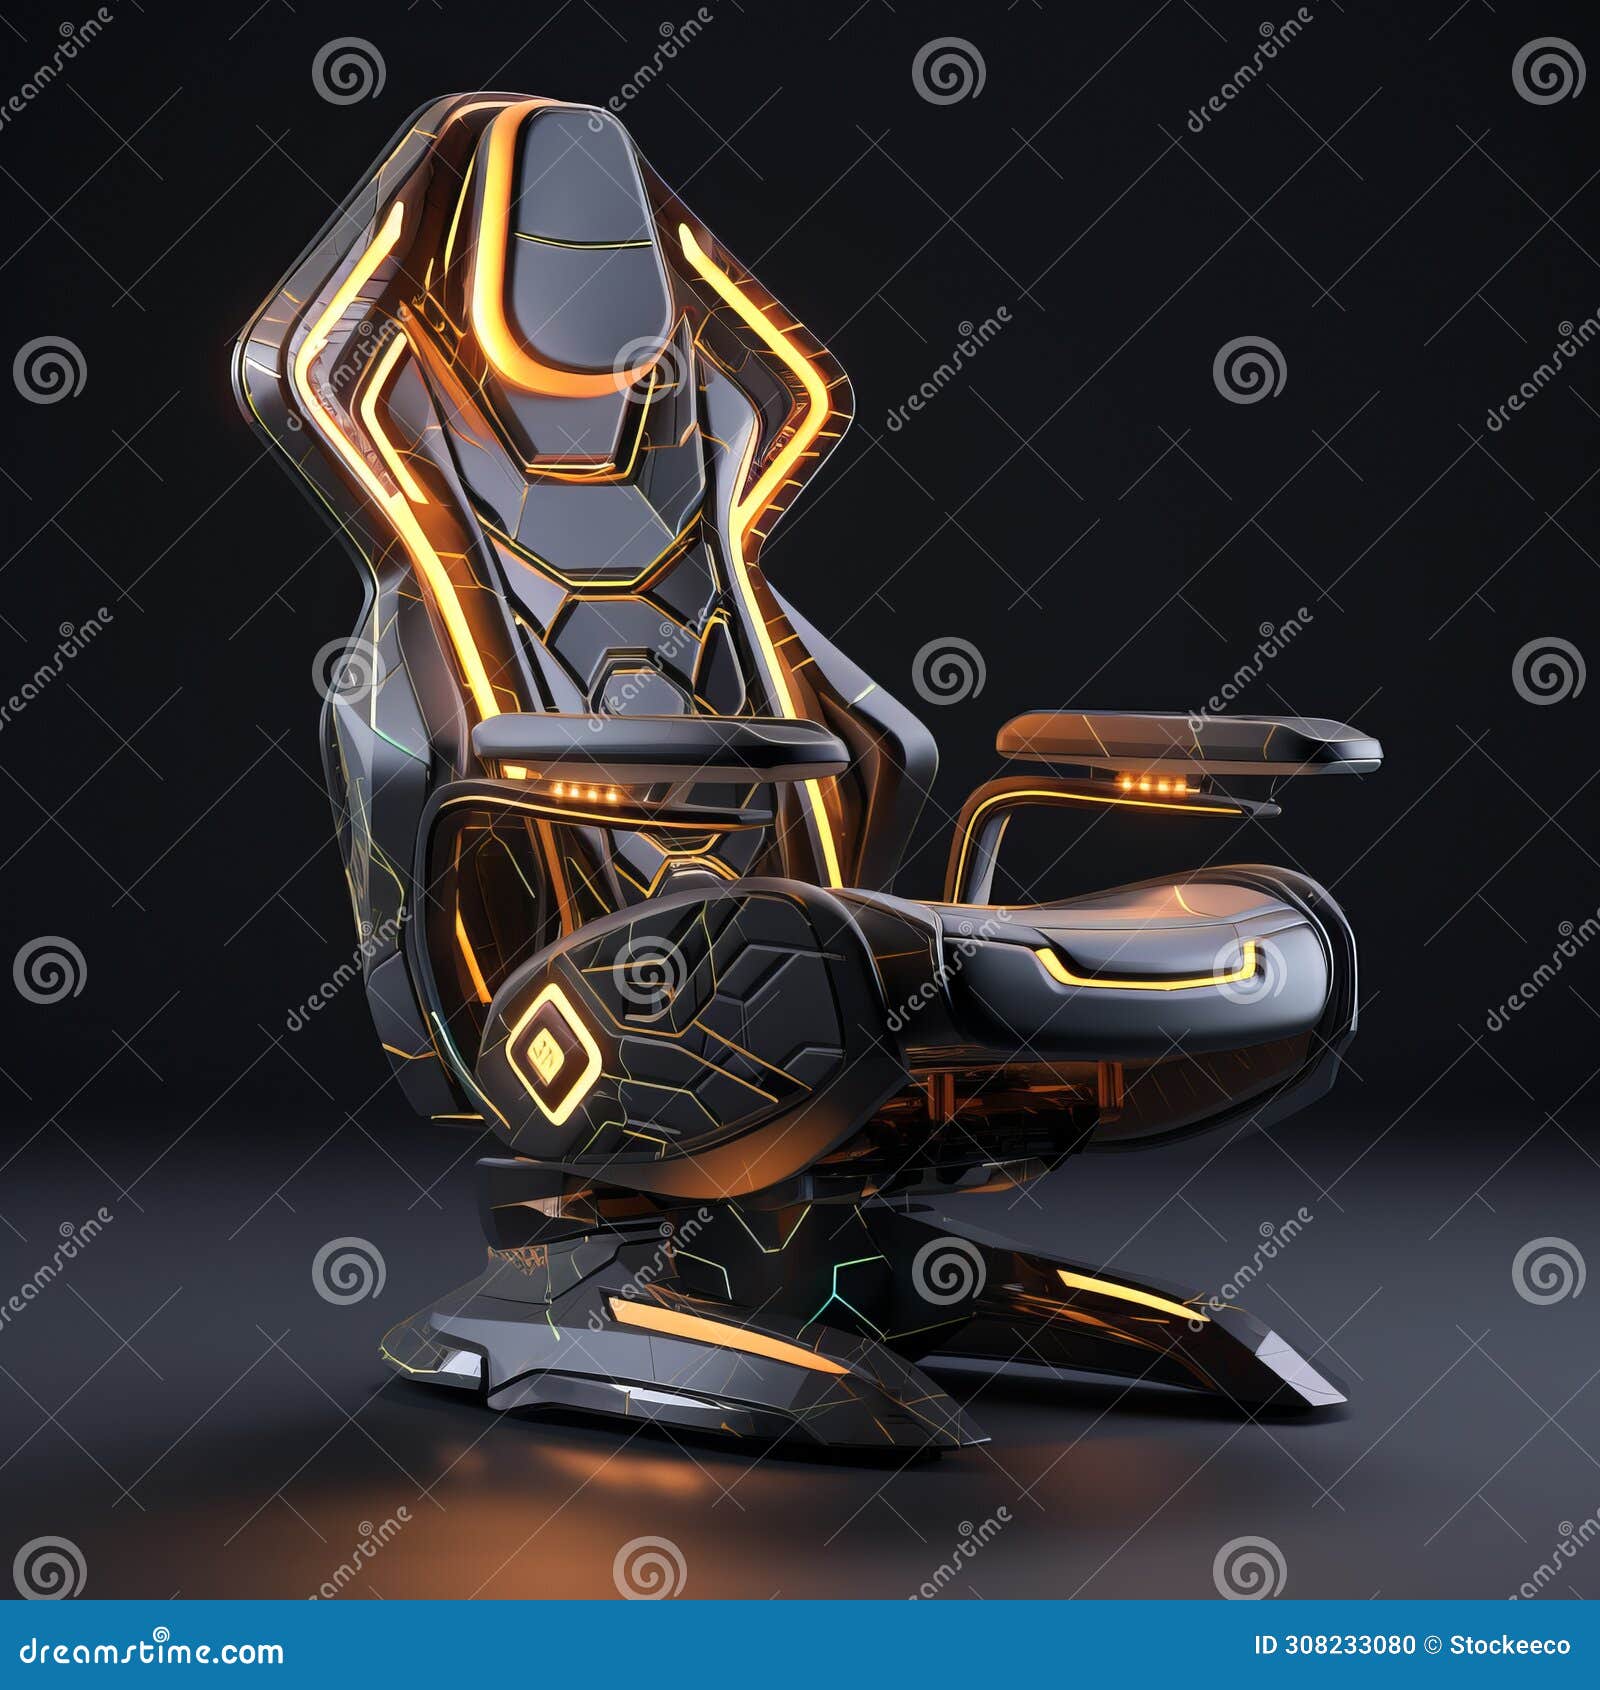 futuristic gamer chair - 3d render with eye-catching detail